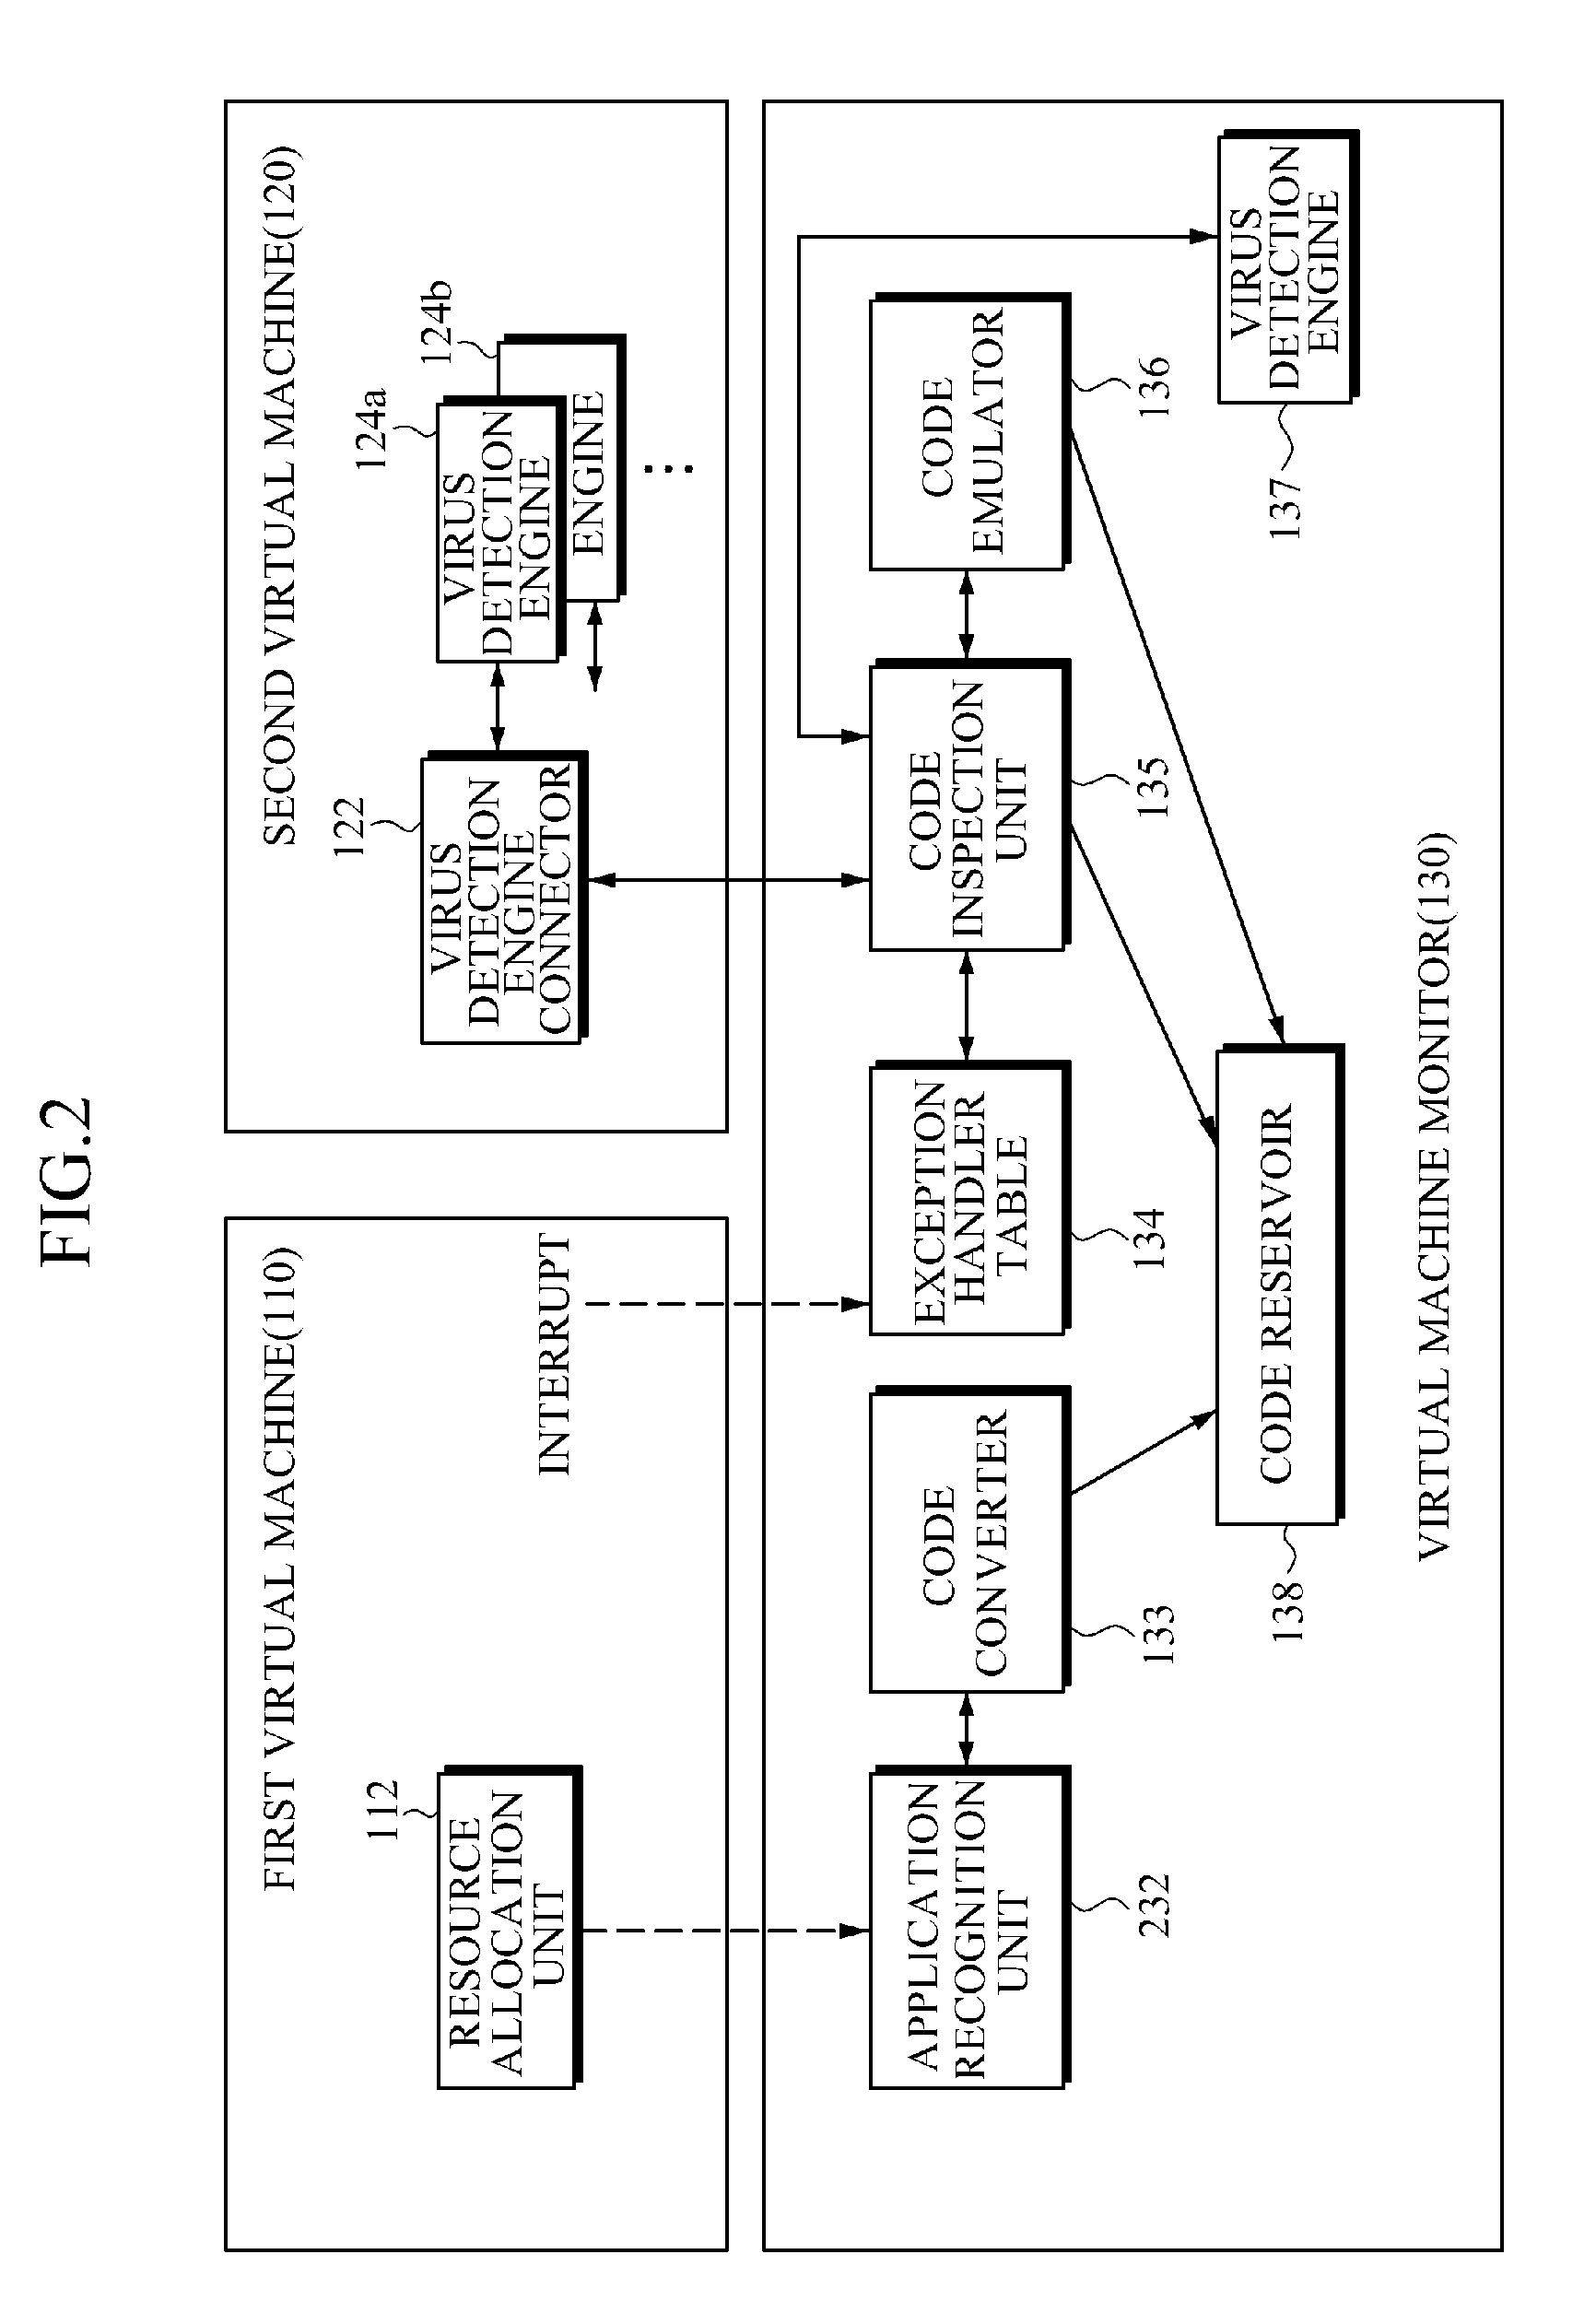 Apparatus and method for preventing virus code execution